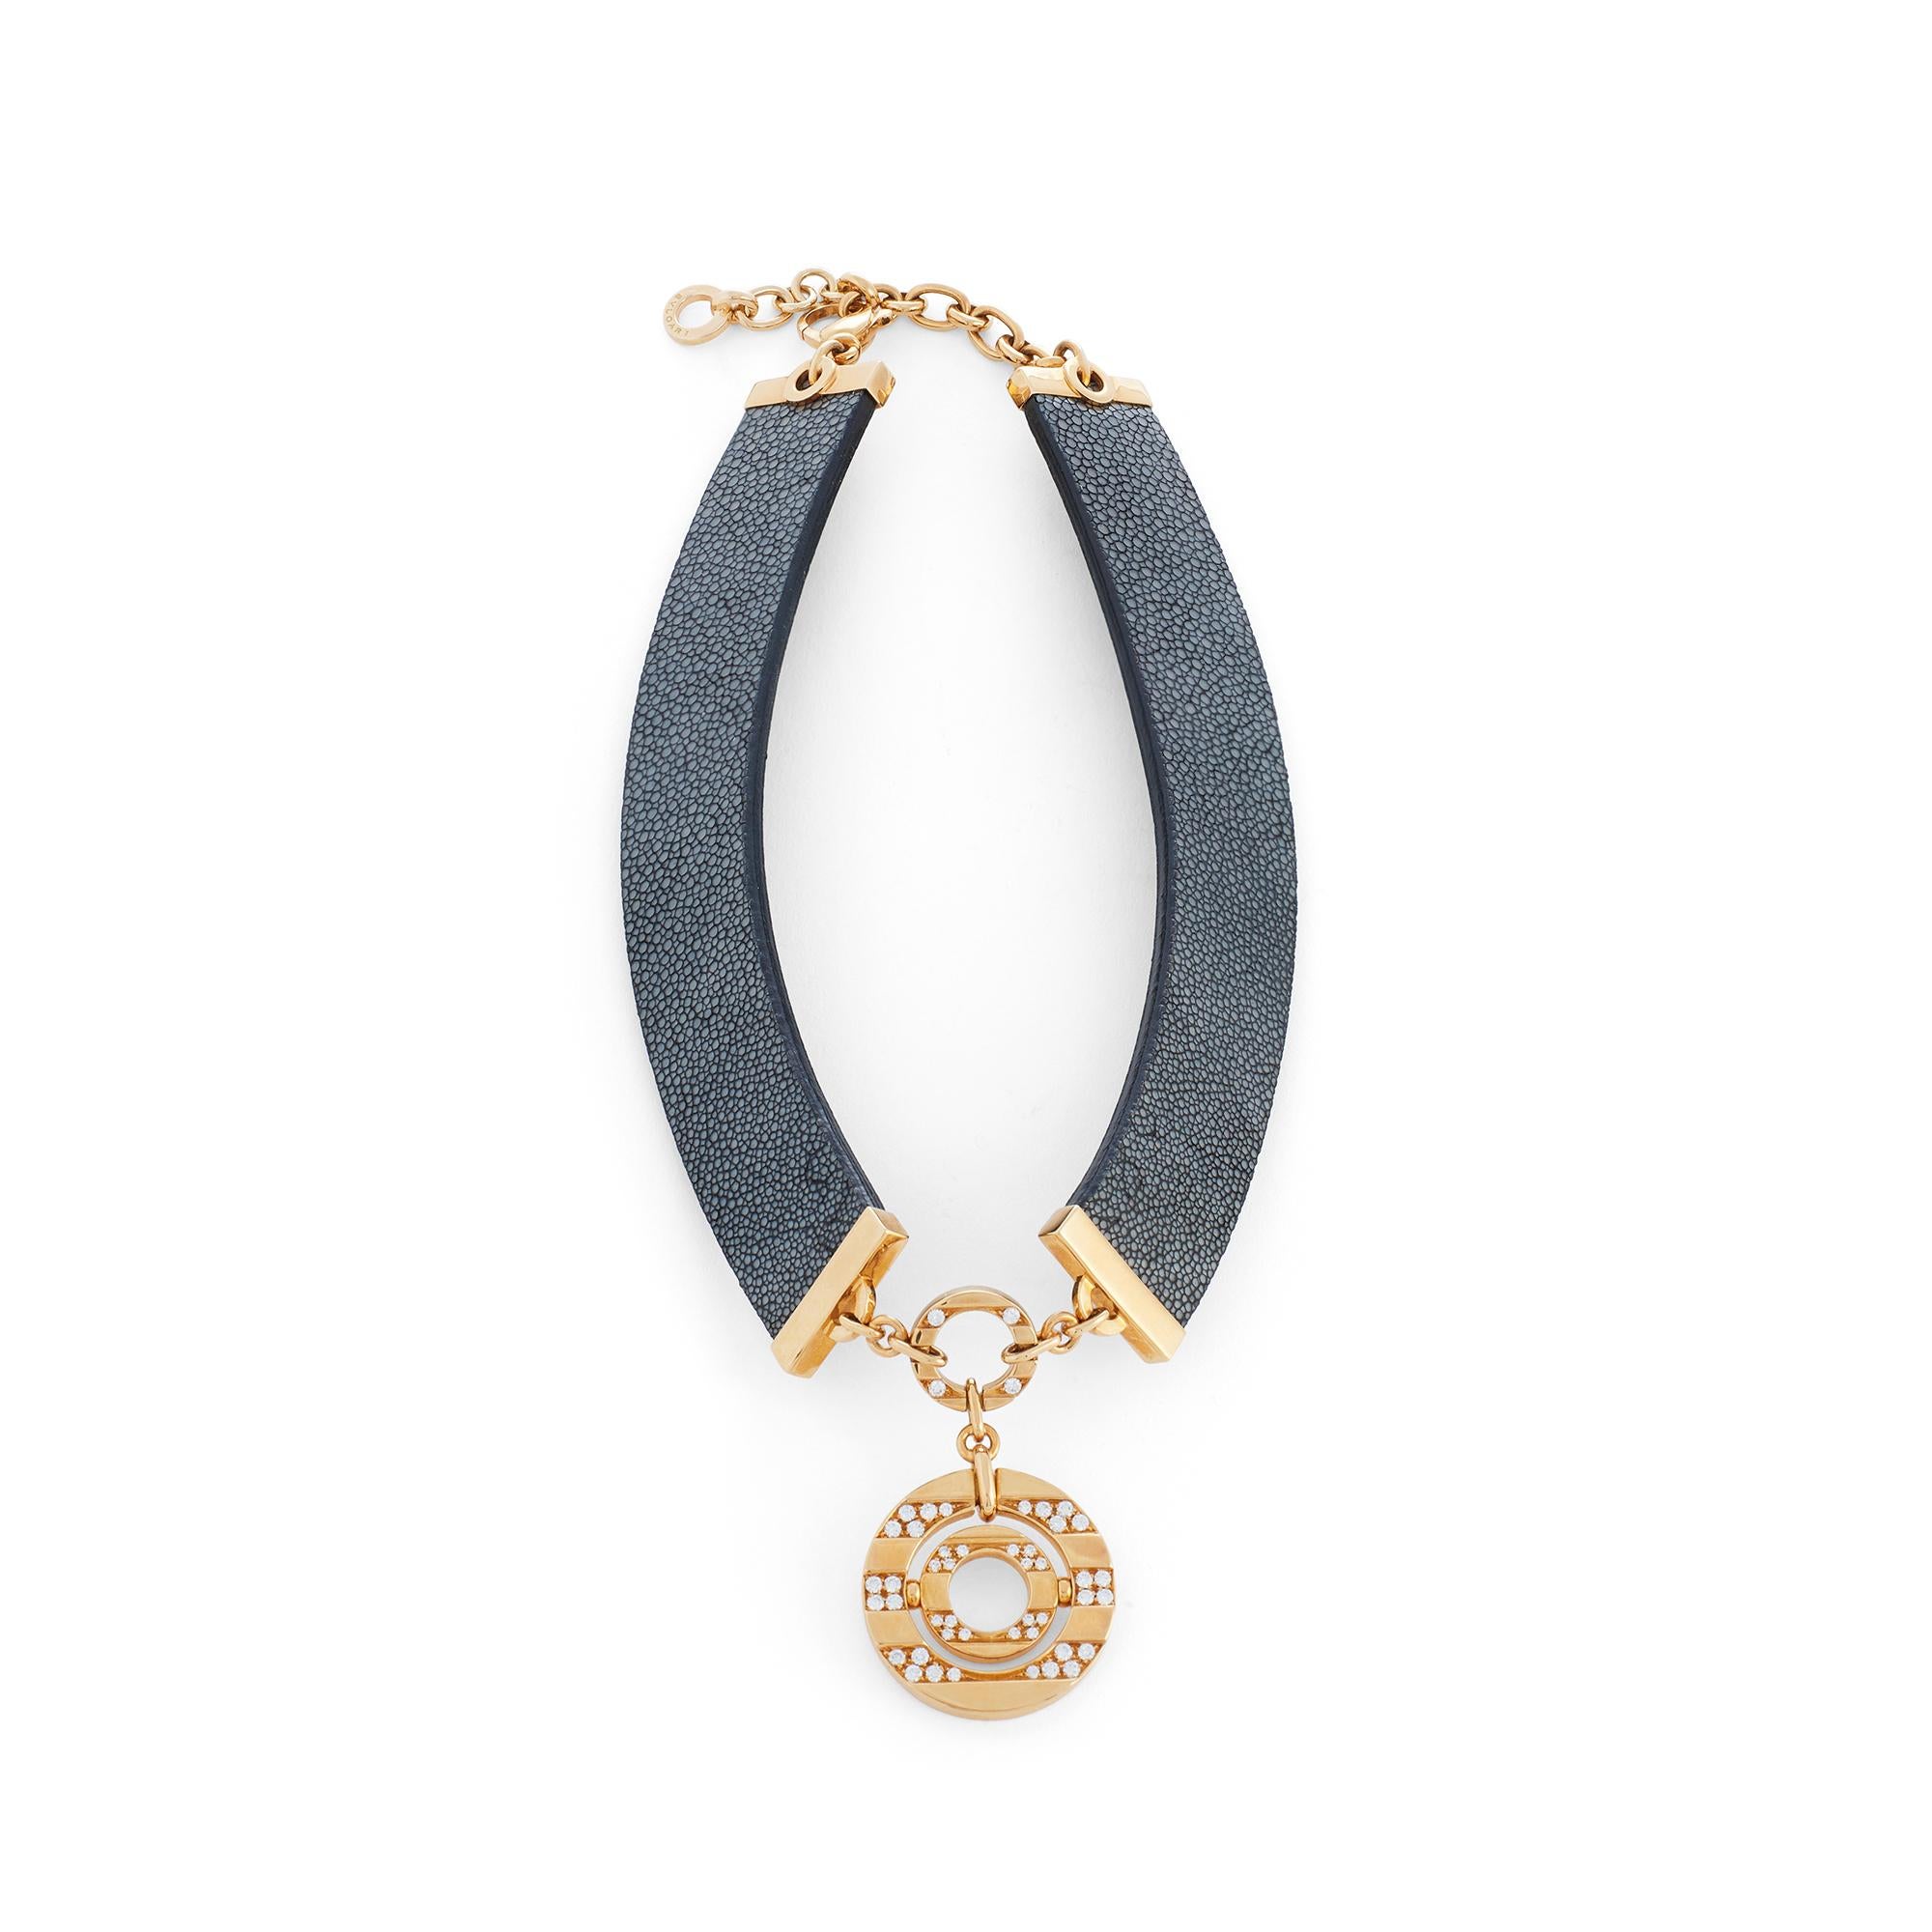 Contemporary Bvlgari 'Astrale' Galuchat Leather Diamond Necklace